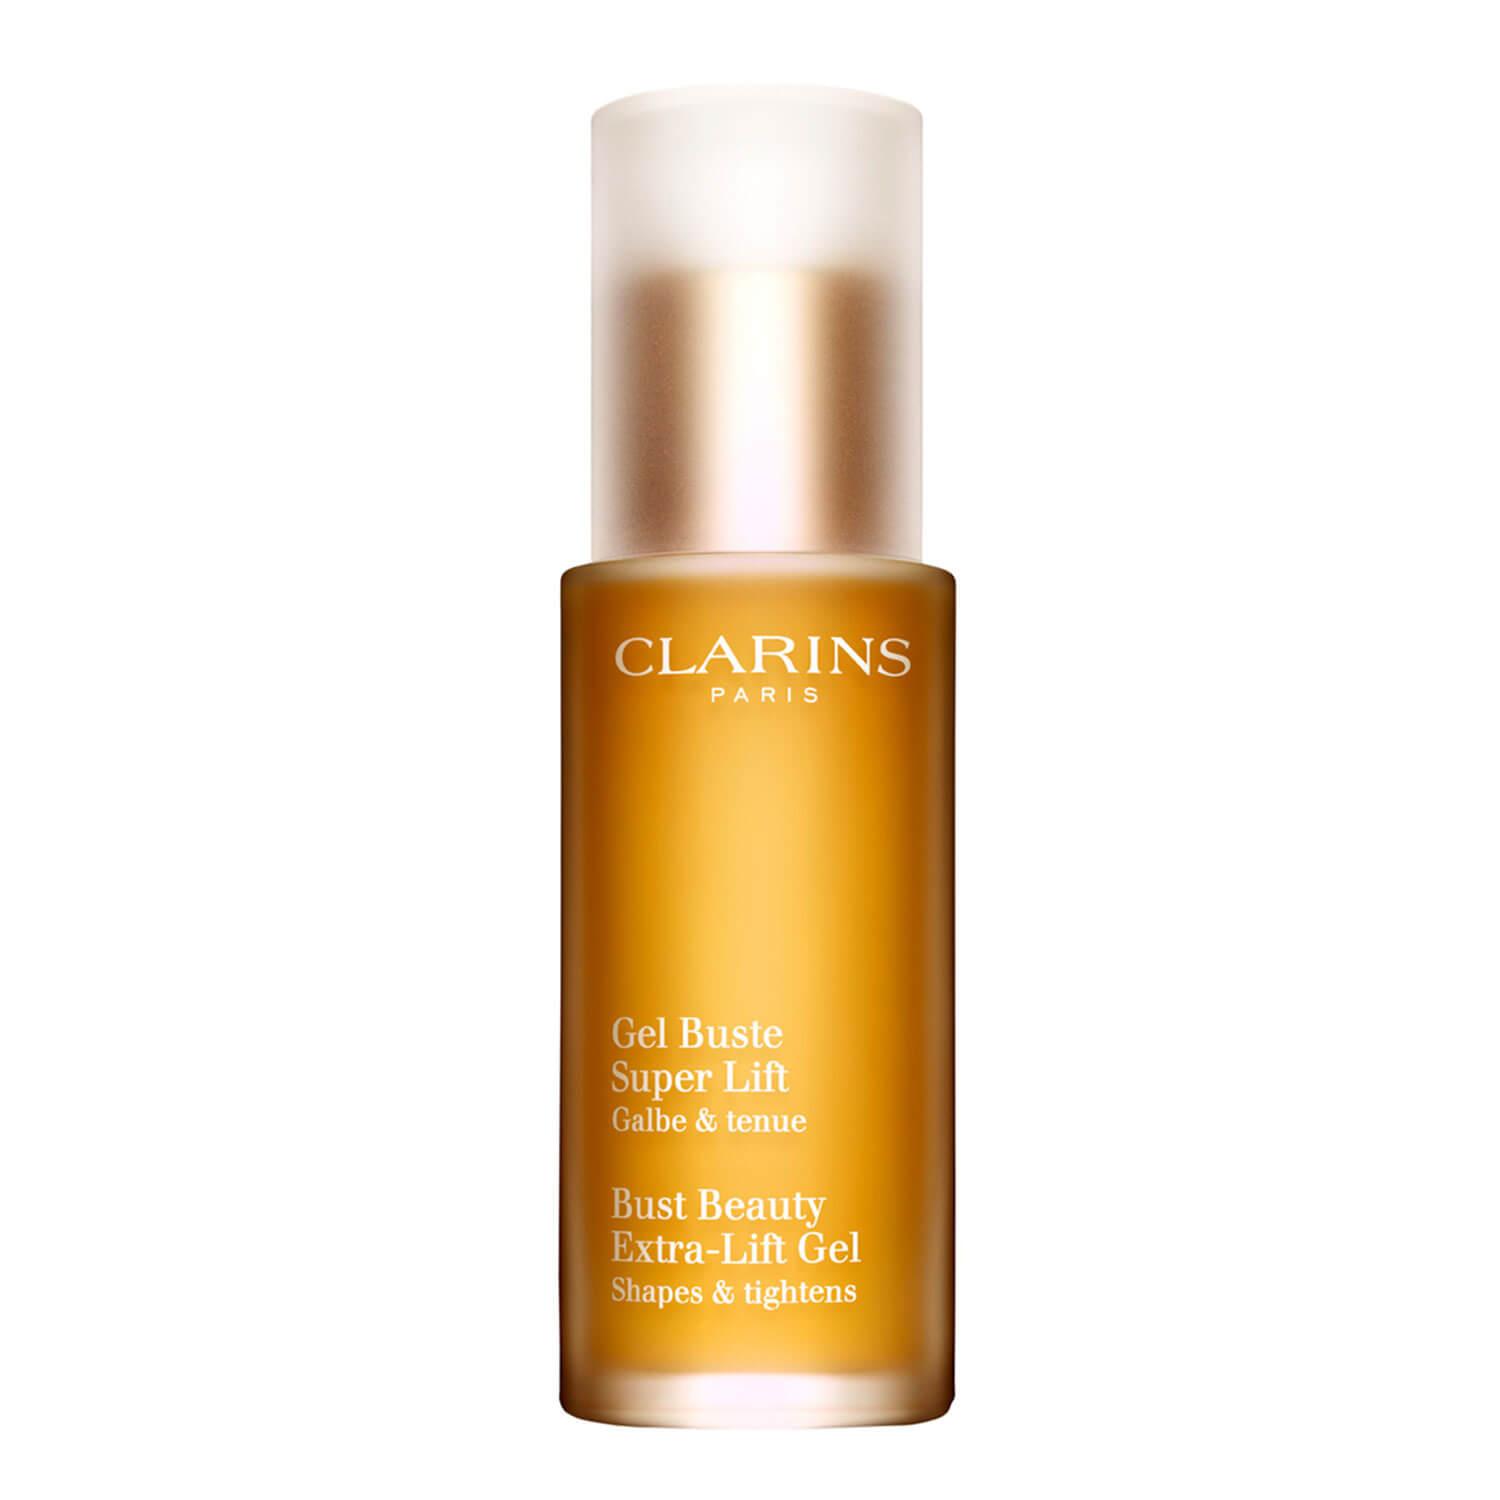 Clarins Body - Bust Beauty Extra-Lift Gel